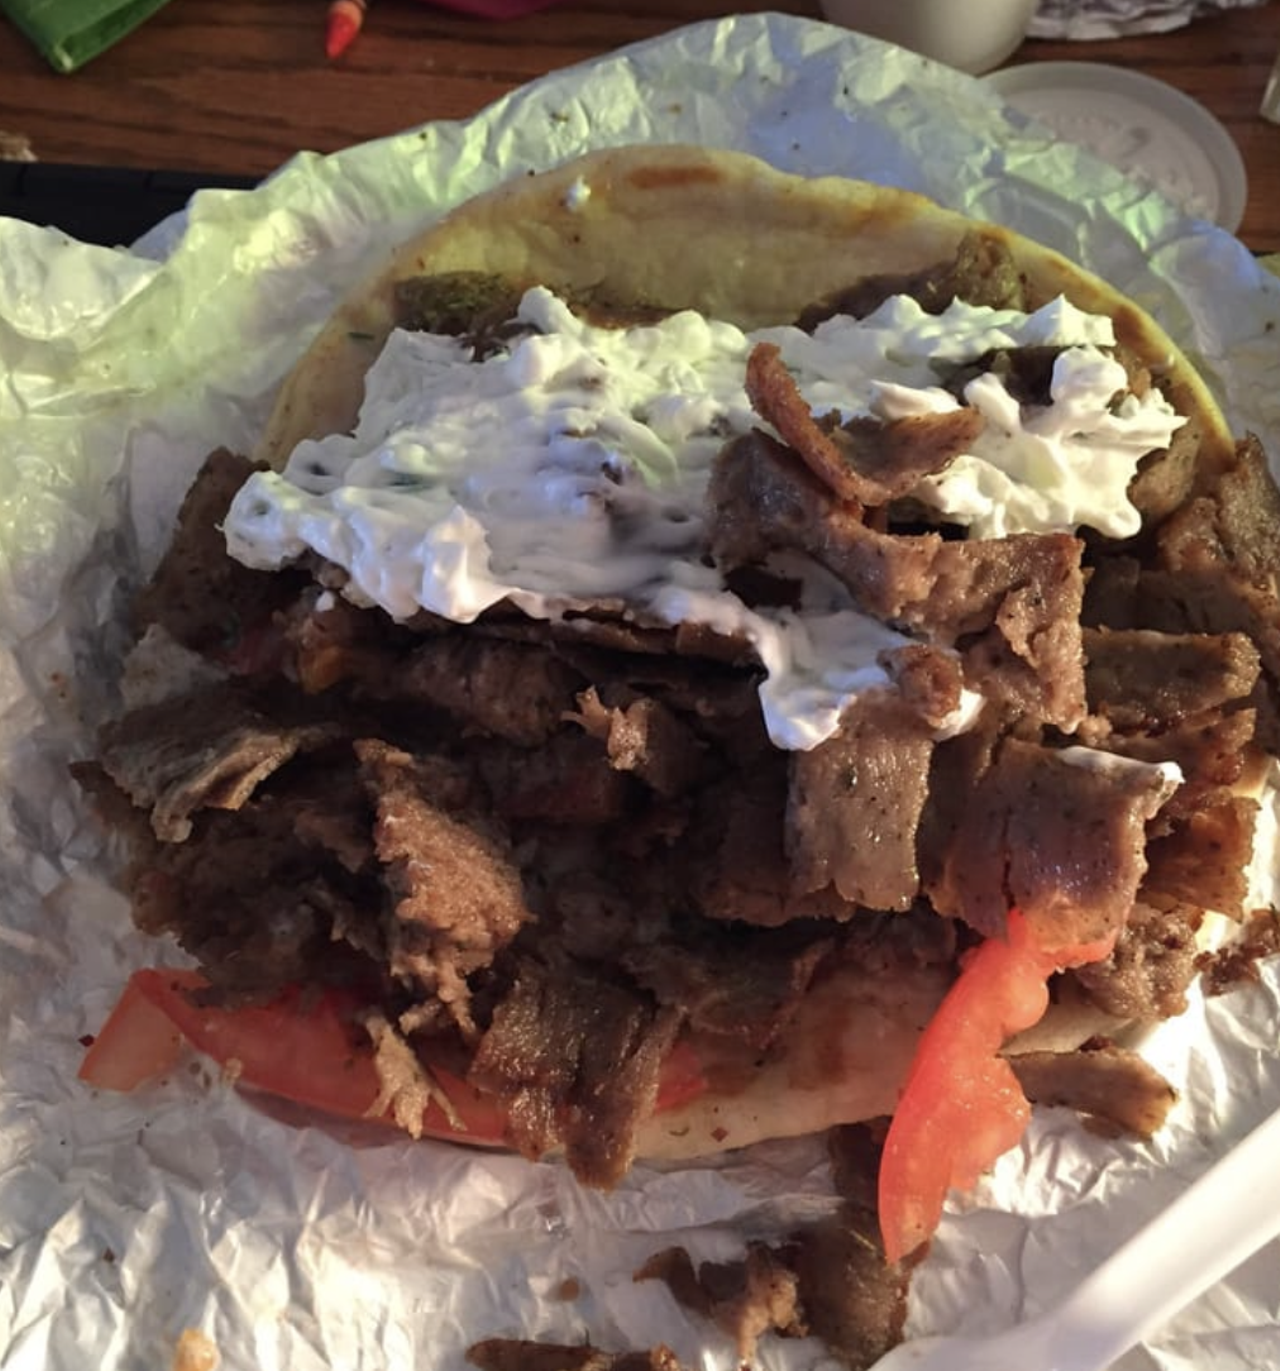  Bylo Gyro Bob’s
14007 Puritas Ave., Cleveland
“Been coming to this place for over six years. This place is so consistent and good. As reliable as death and taxes. Everyone there is so nice and any sandwich i get is top notch. If you haven't been here you are missing out,” Mike M. on Yelp